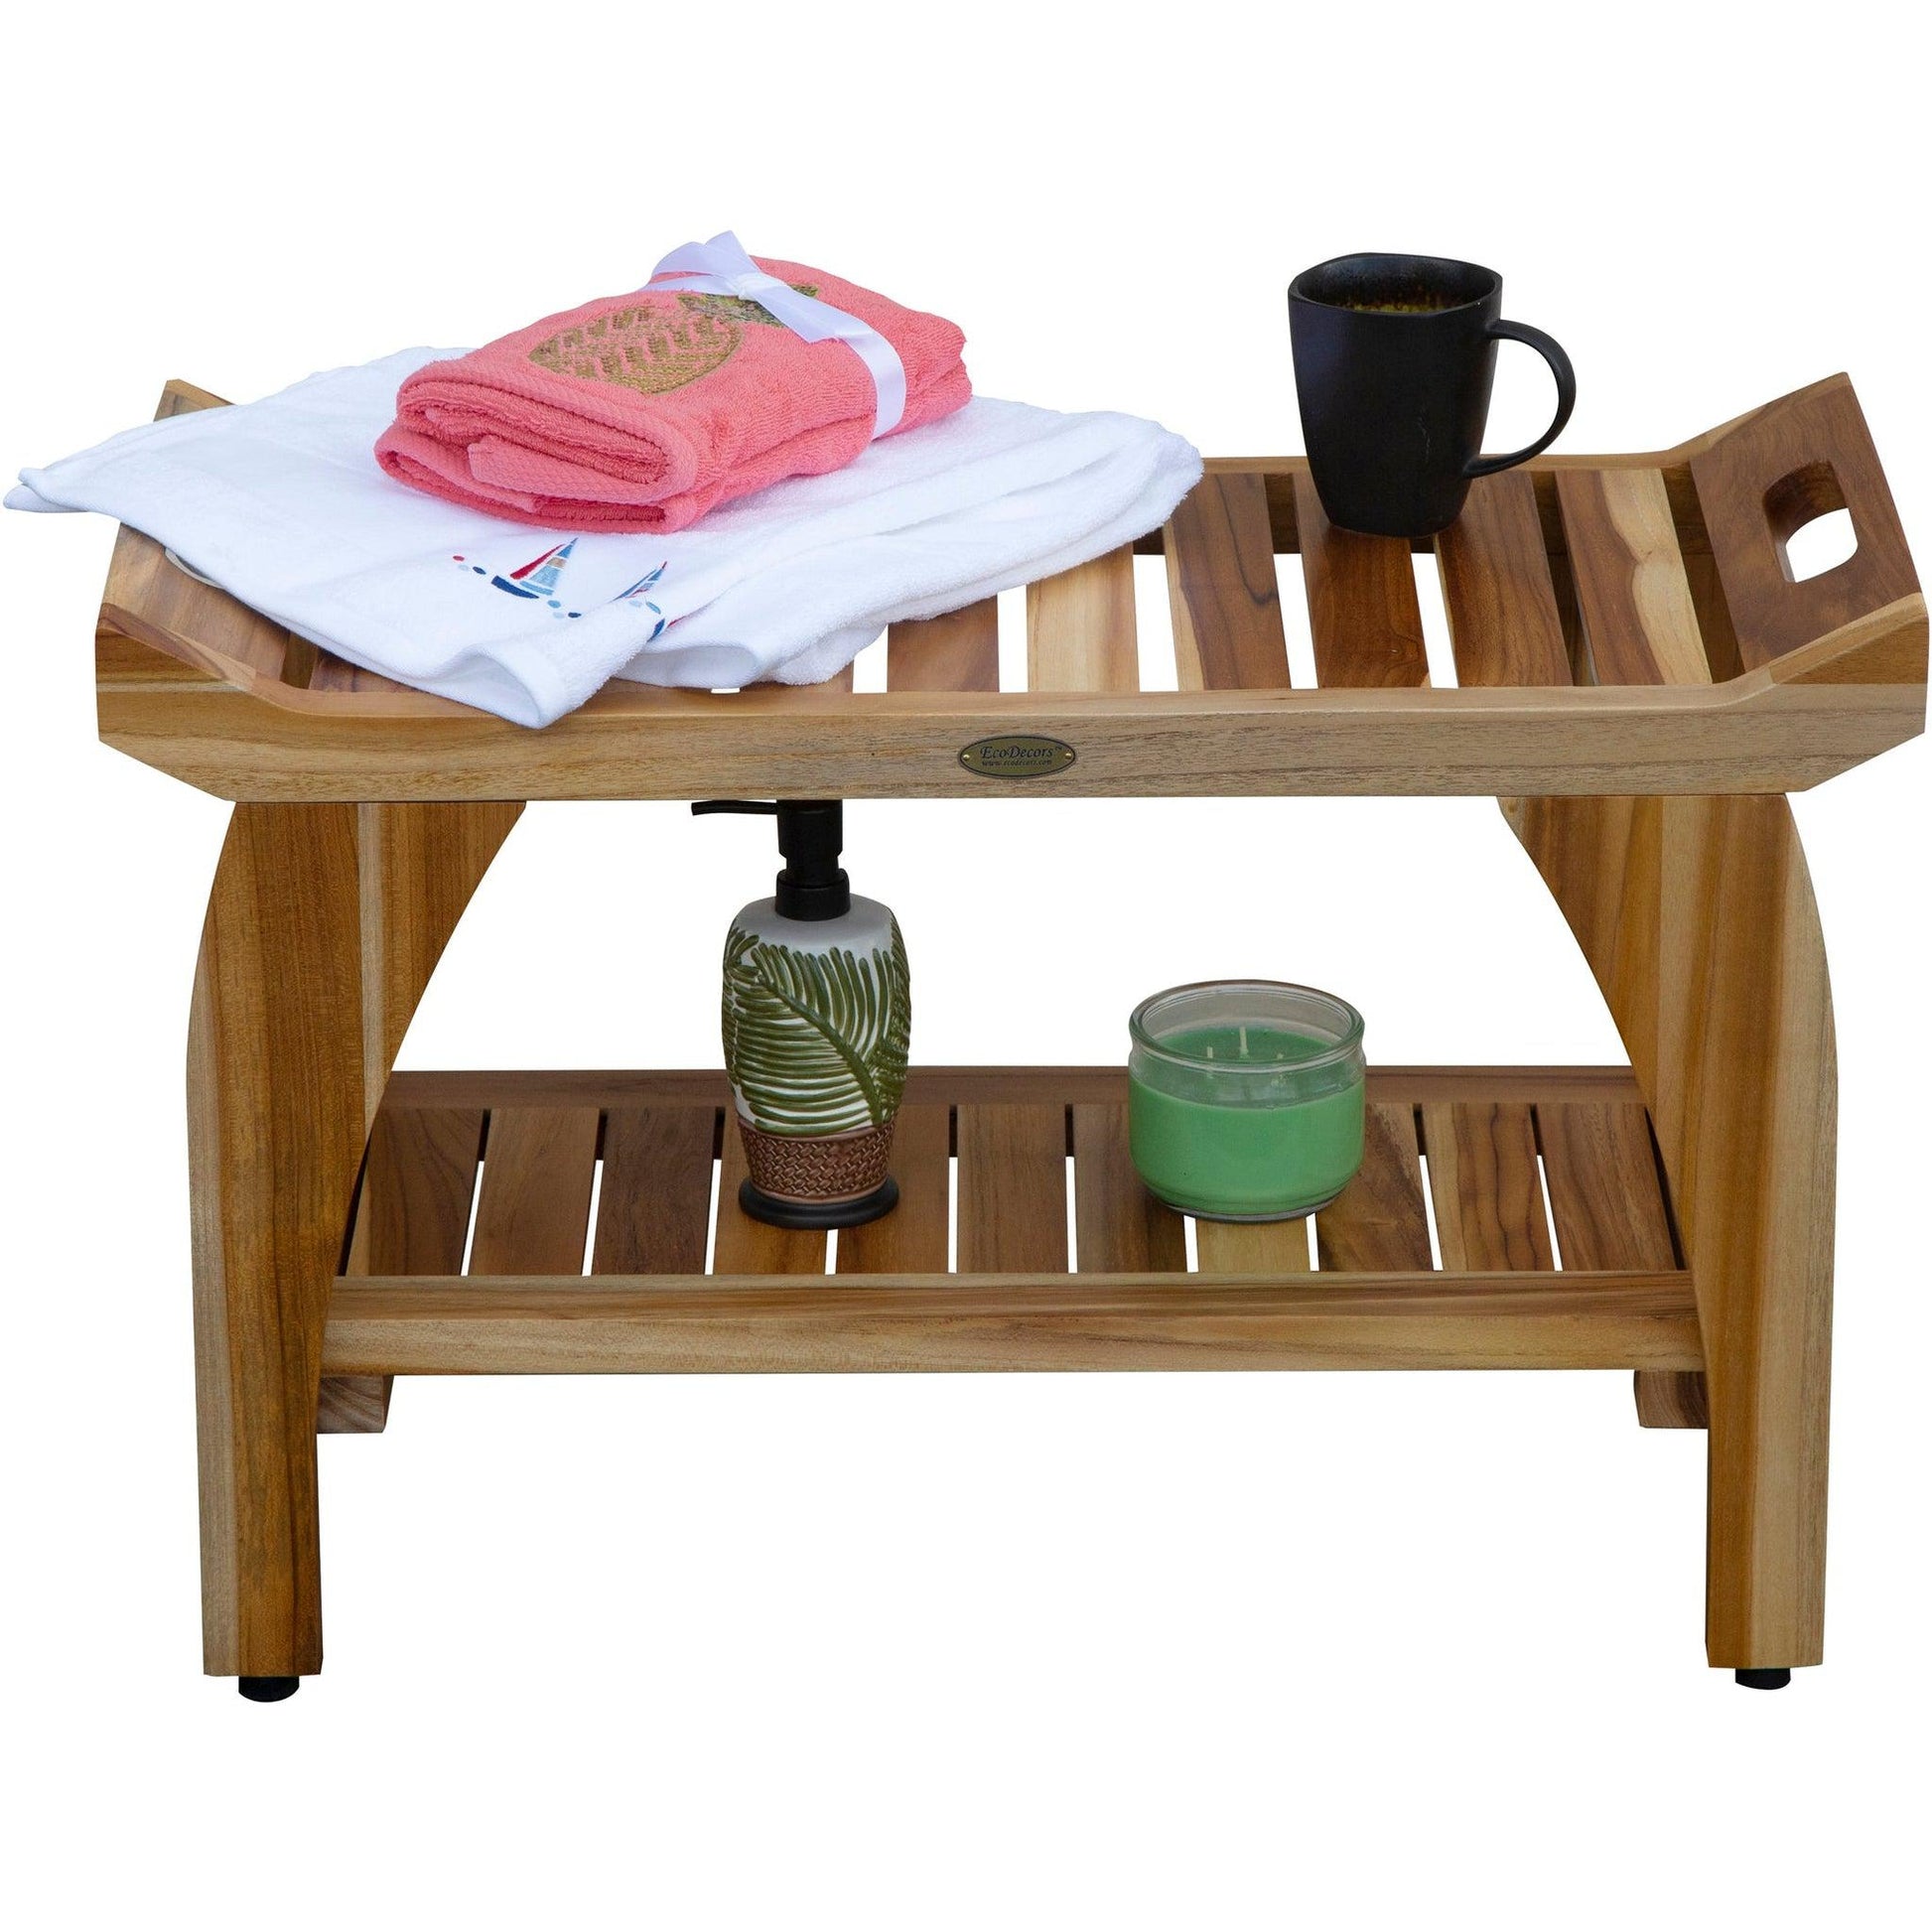 EcoDecors Tranquility 29" EarthyTeak Solid Teak Wood Shower Bench With Shelf and LiftAide Arms